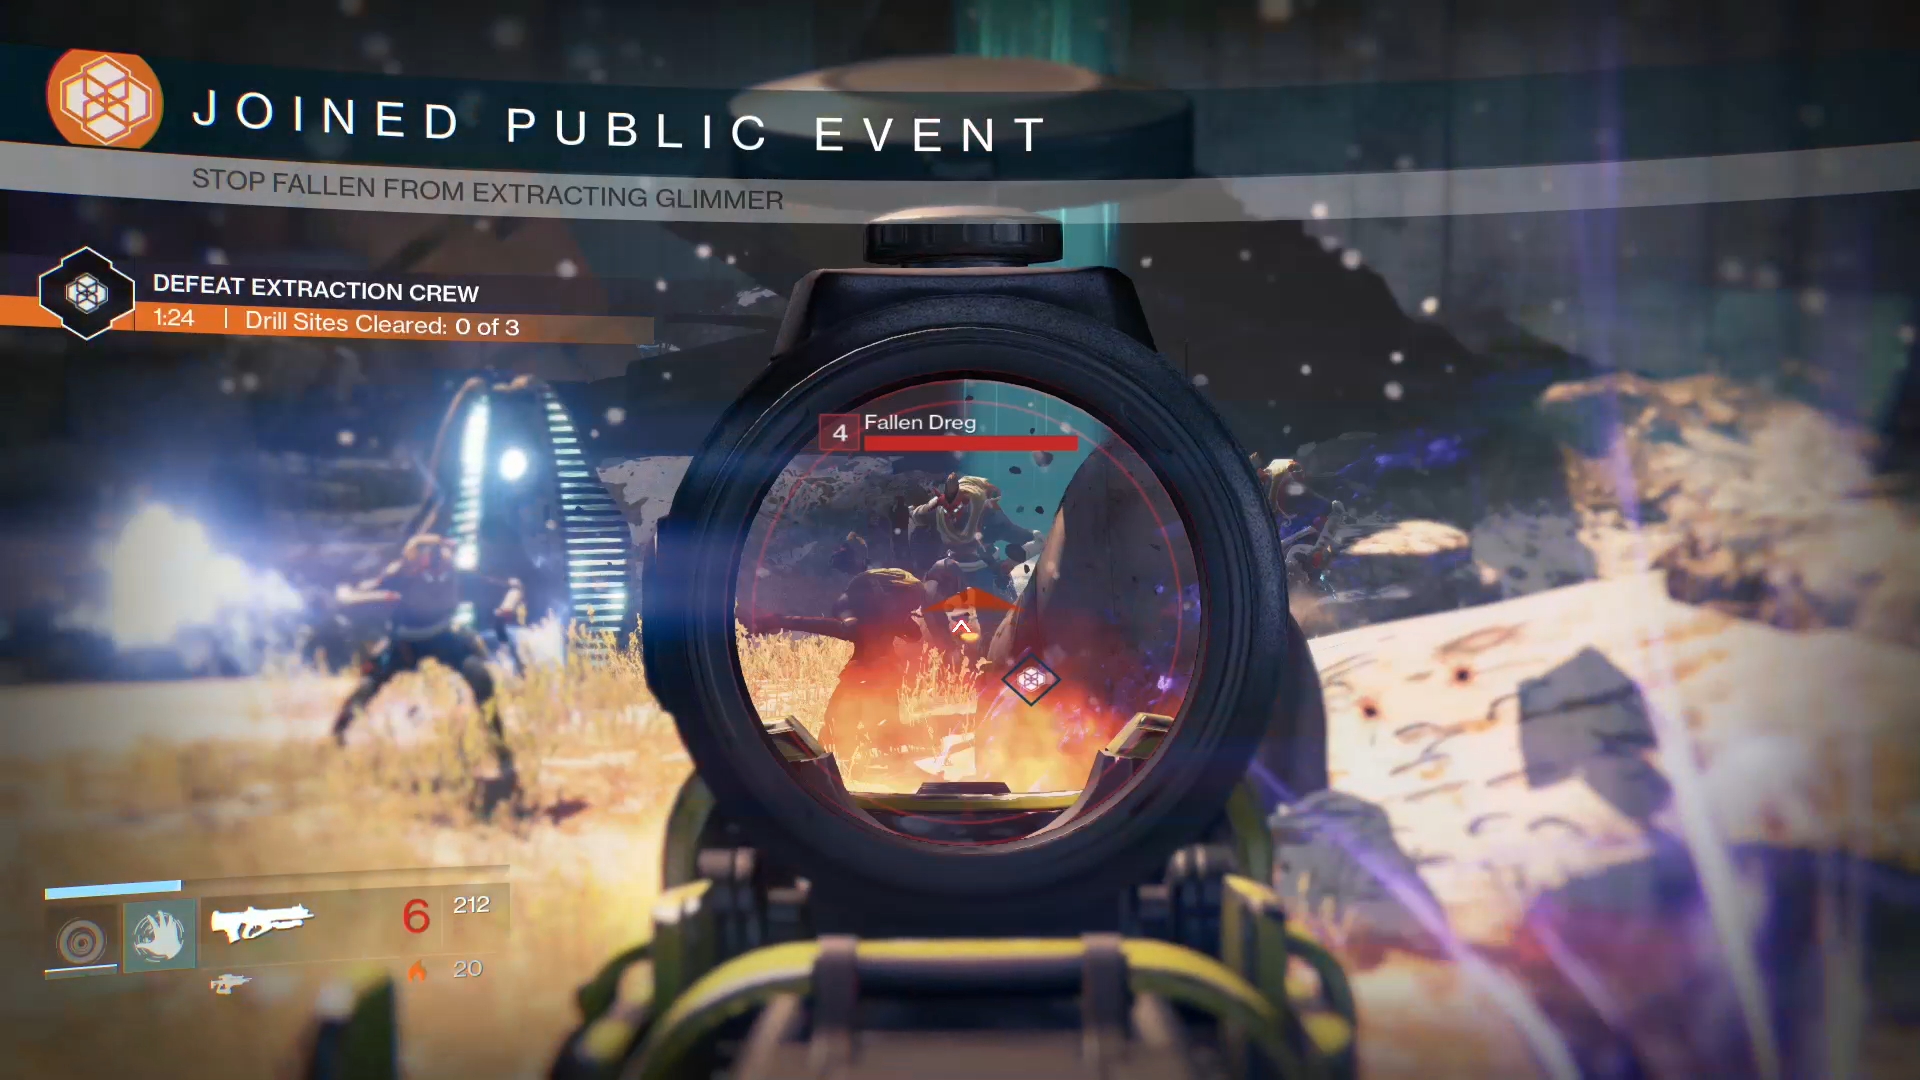 Destiny's Public Event system is incredible and fun.